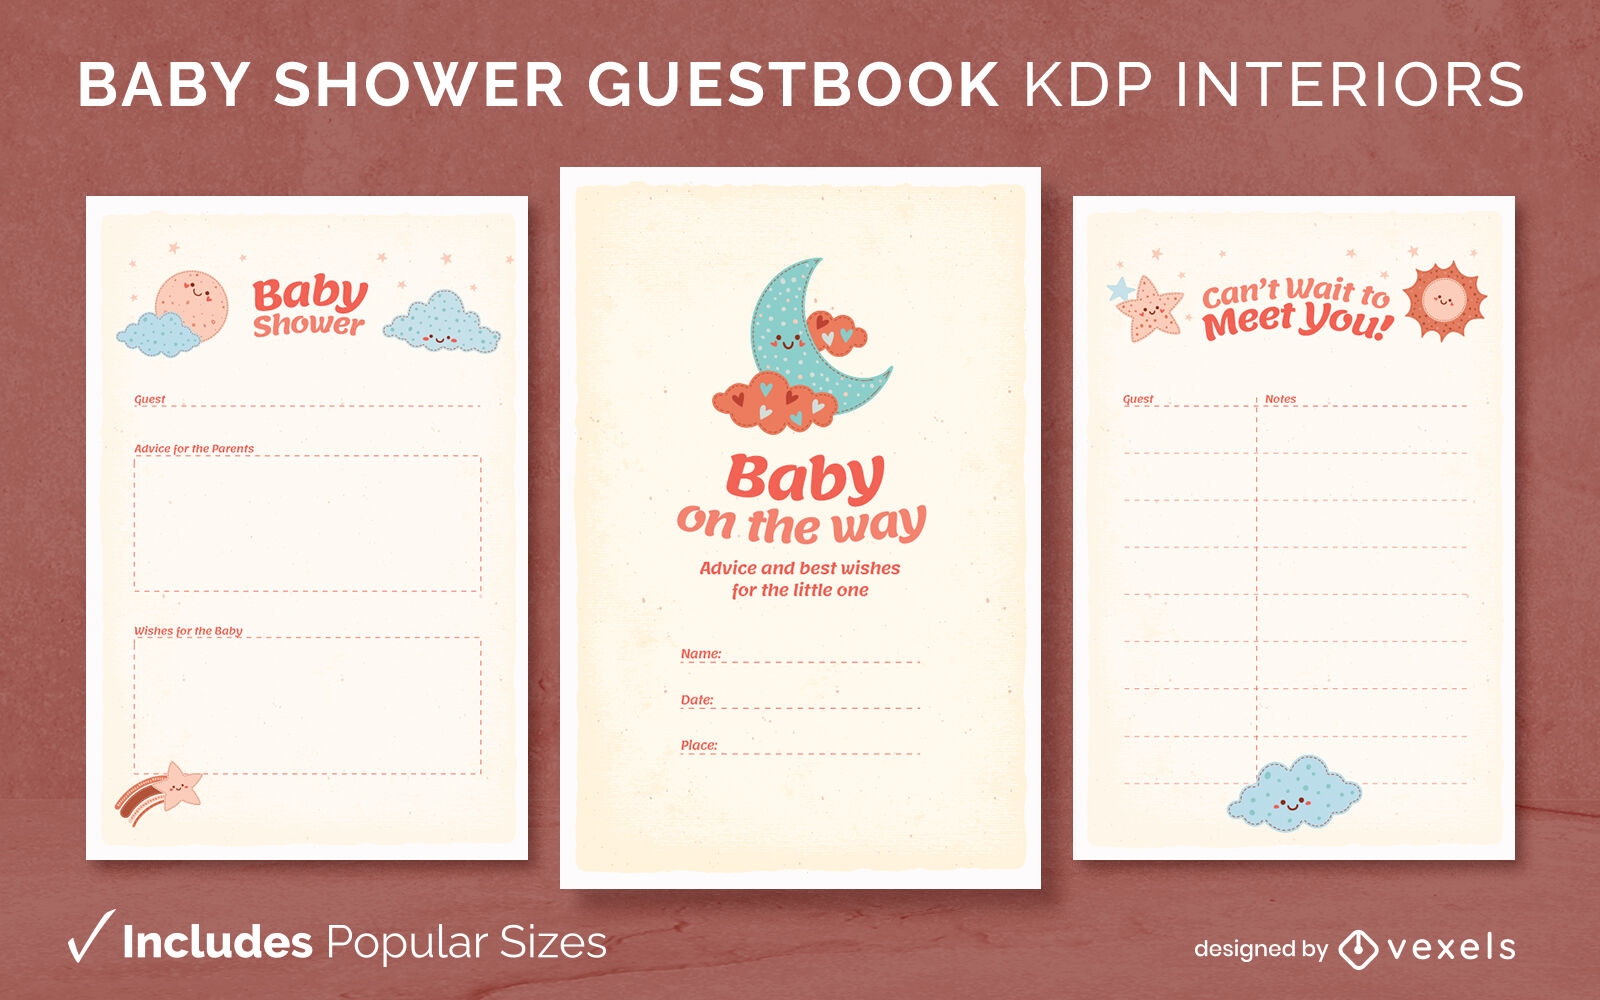 Baby shower guestbook diary design template KDP